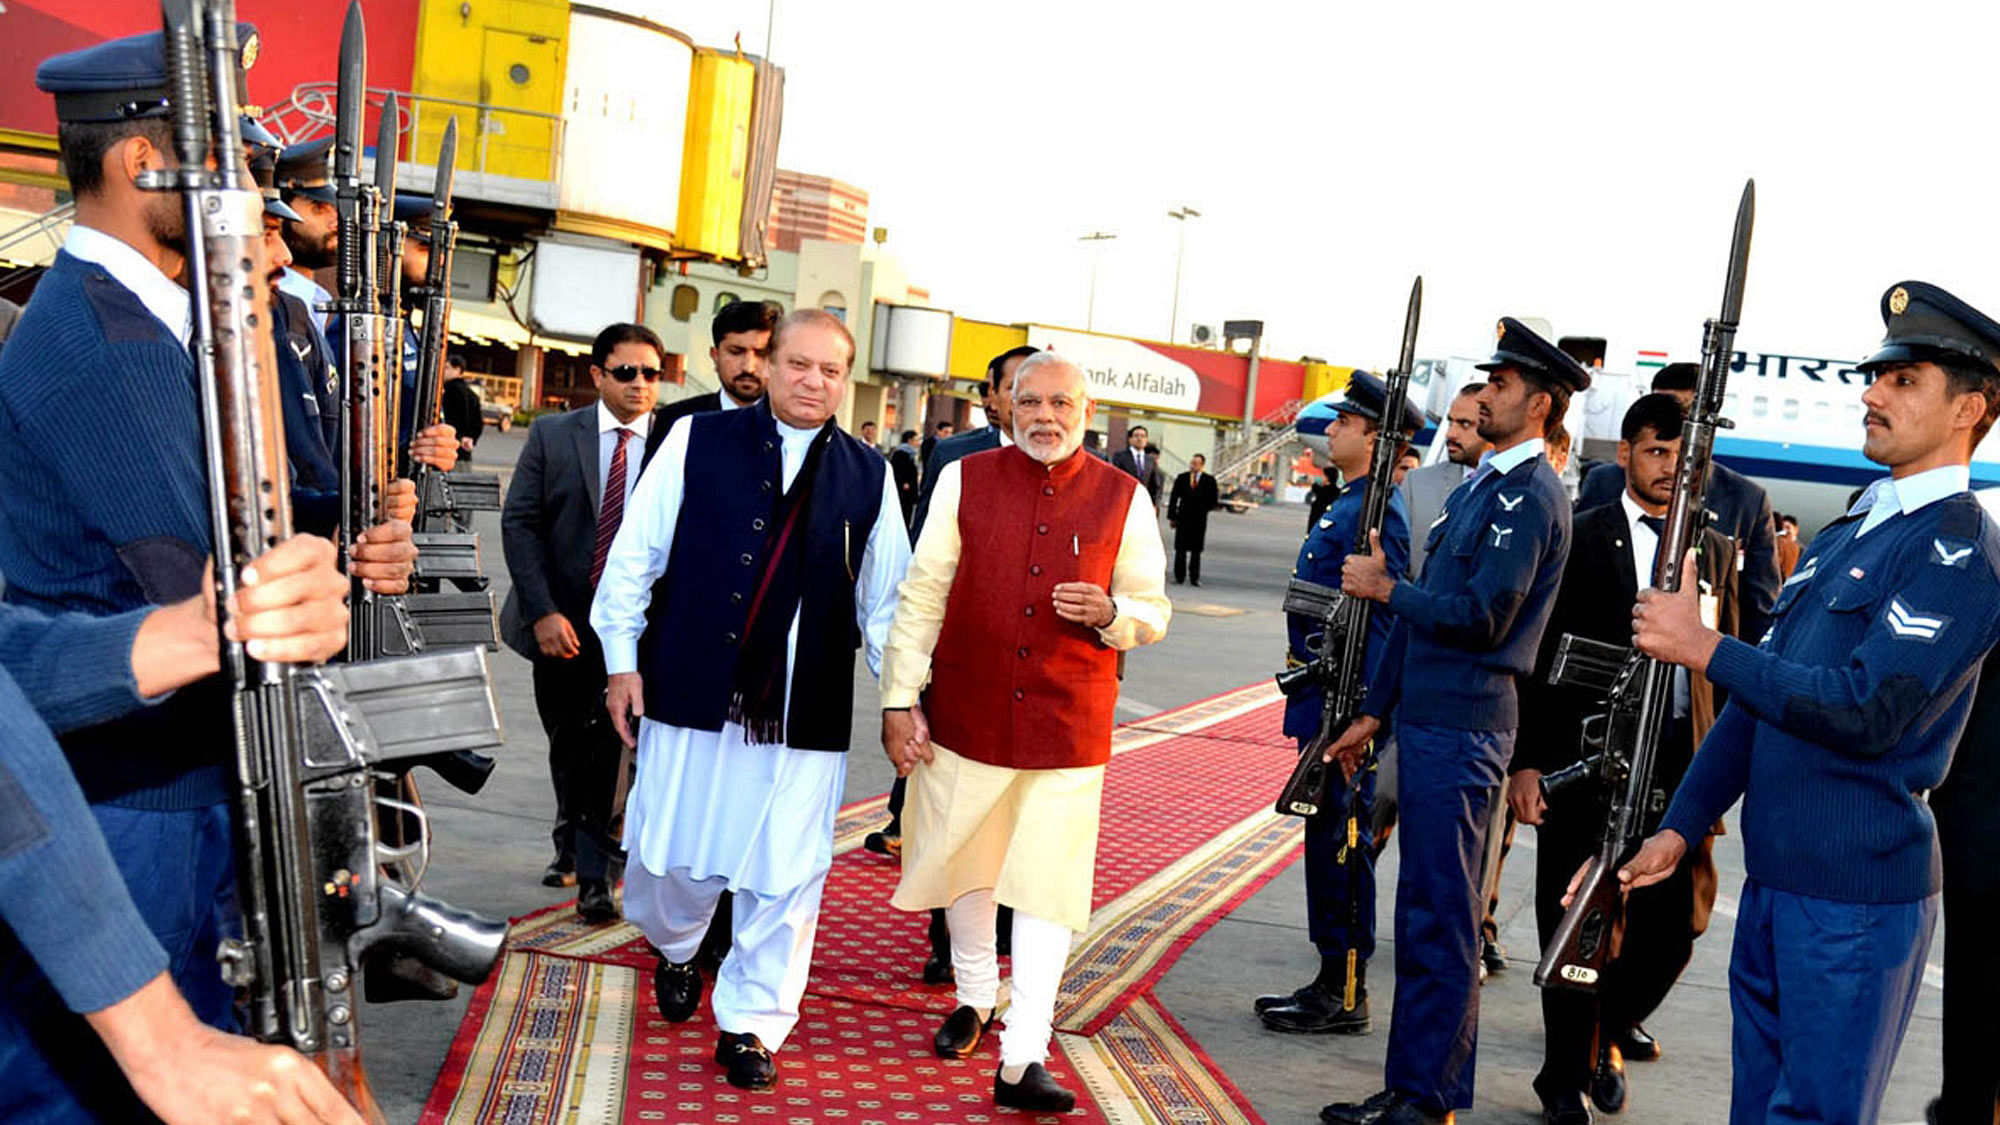  India’s Prime Minister Narendra Modi (right) reviews guard of honour with his Pakistani counterpart Nawaz Sharif in Lahore, Pakistan on Friday, Dec 25, 2015. (Photo: AP)